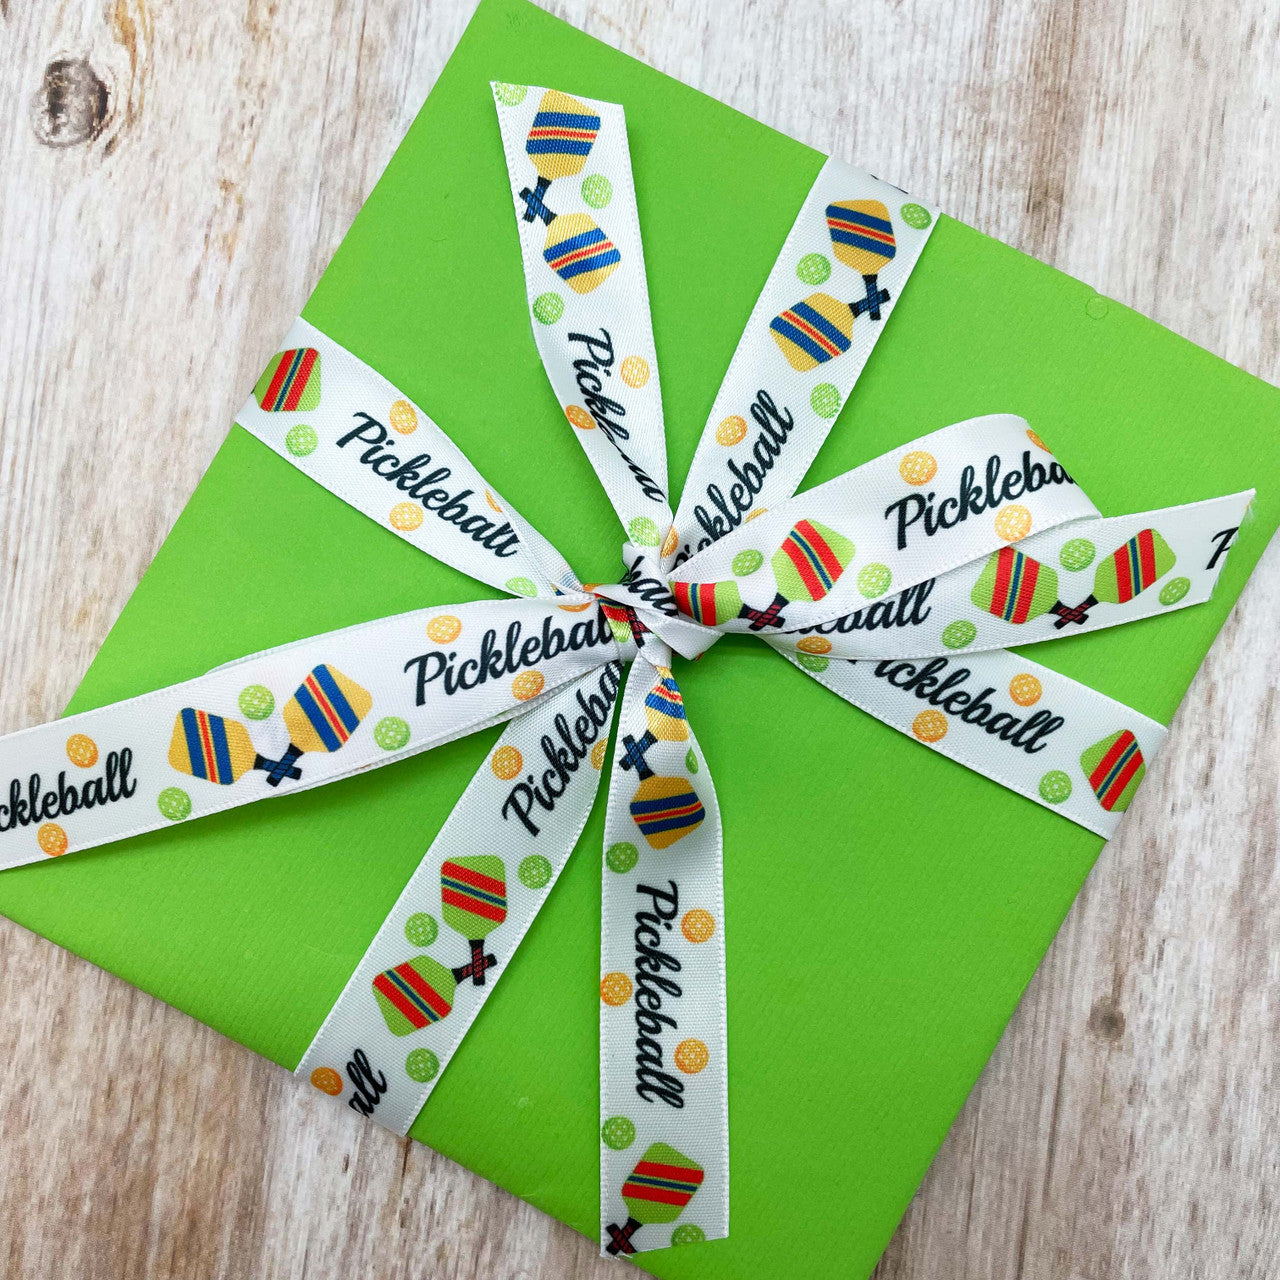 Adding this fun ribbon to the Pickleball player in your life will let them know you think they are special!